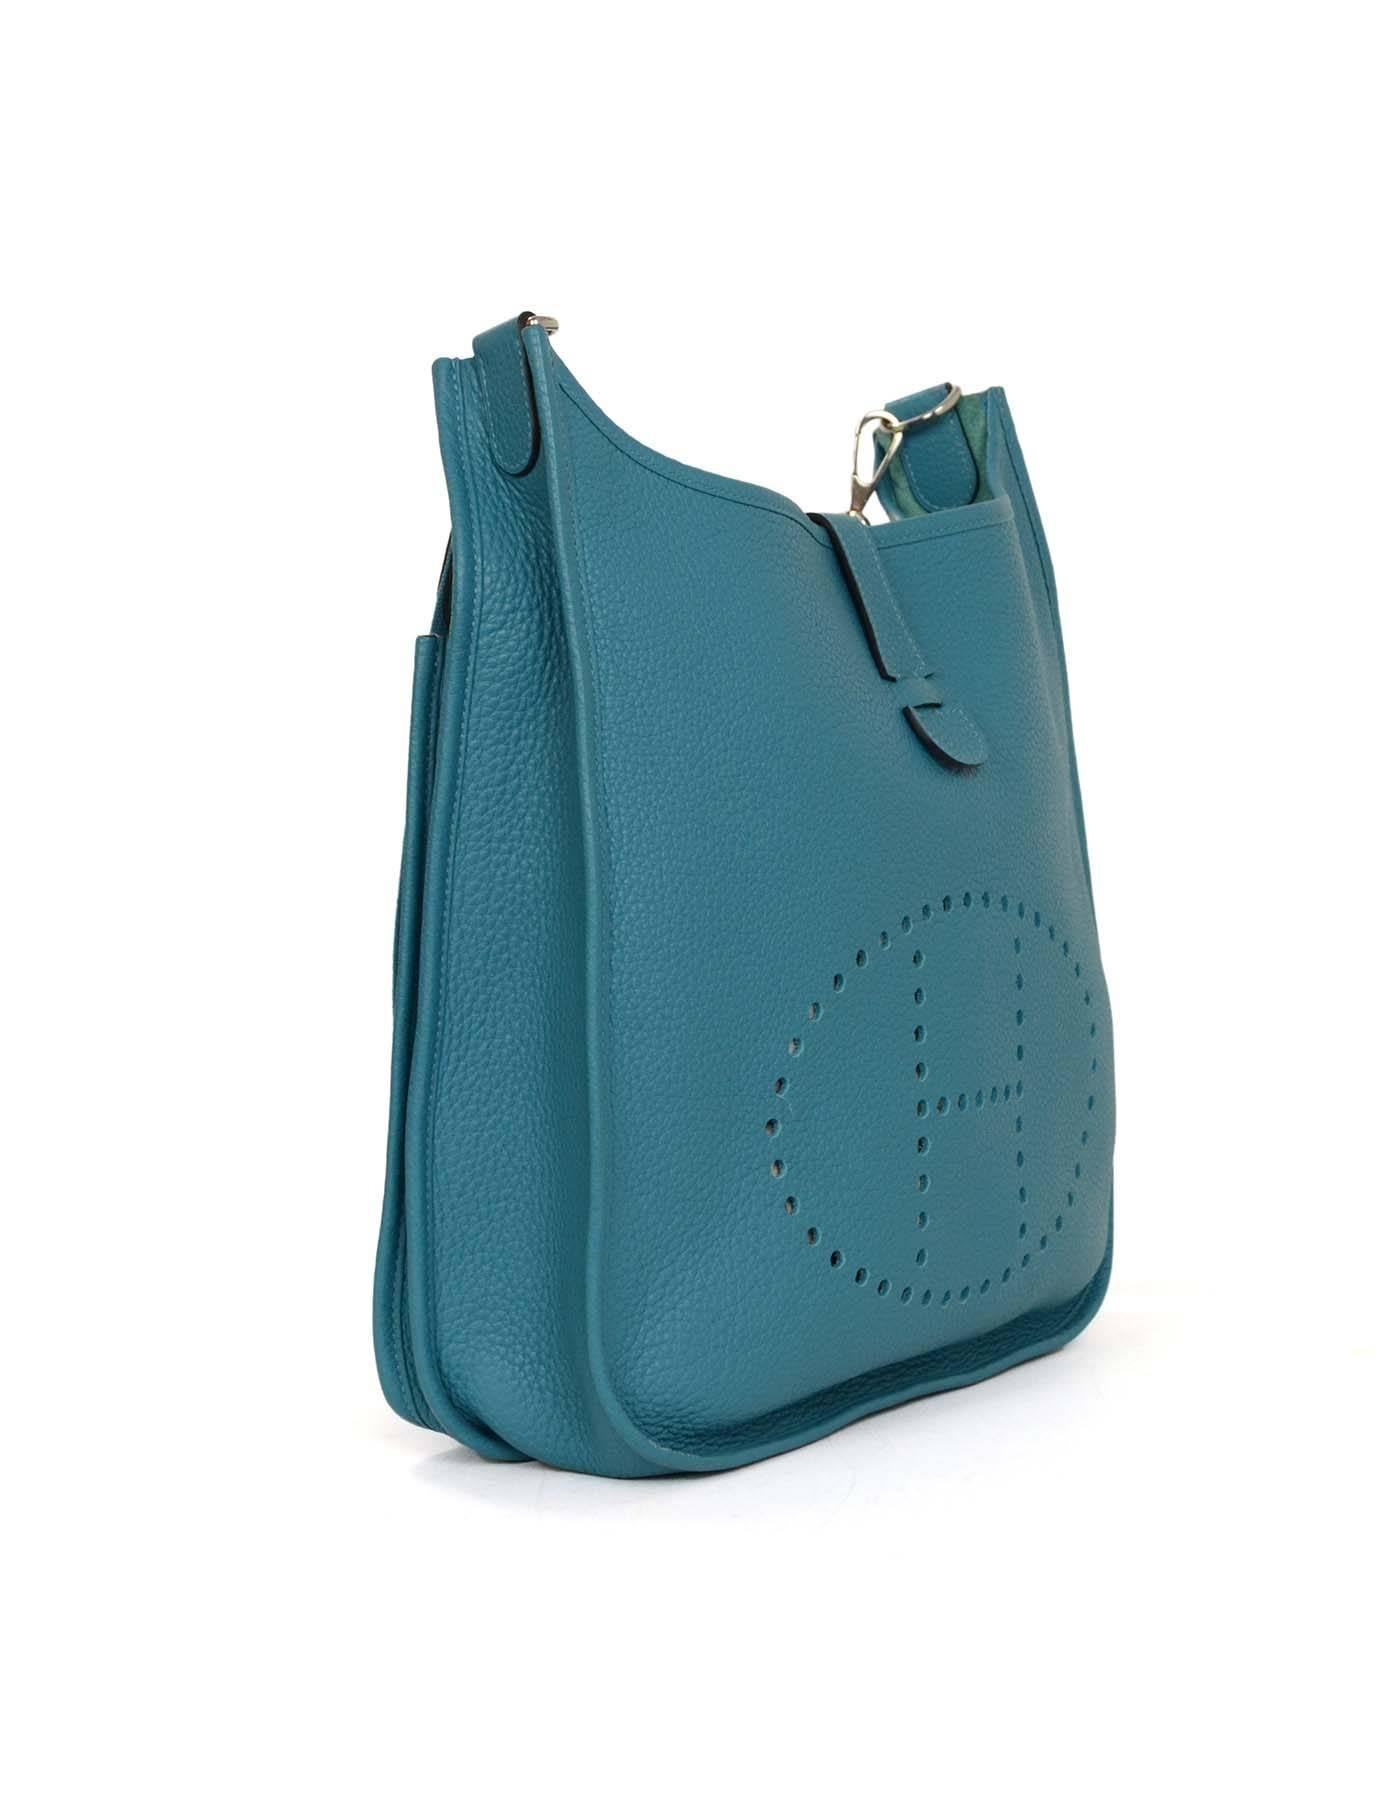 Hermes Turquoise Clemence Evelyne III GM Crossbody Bag 
Features perforated H on front panel of bag and adjustable shoulder/crossbody strap
Made In: France
Year of Production: 2014
Color: Turquoise
Hardware: Palladium
Materials: Clemence